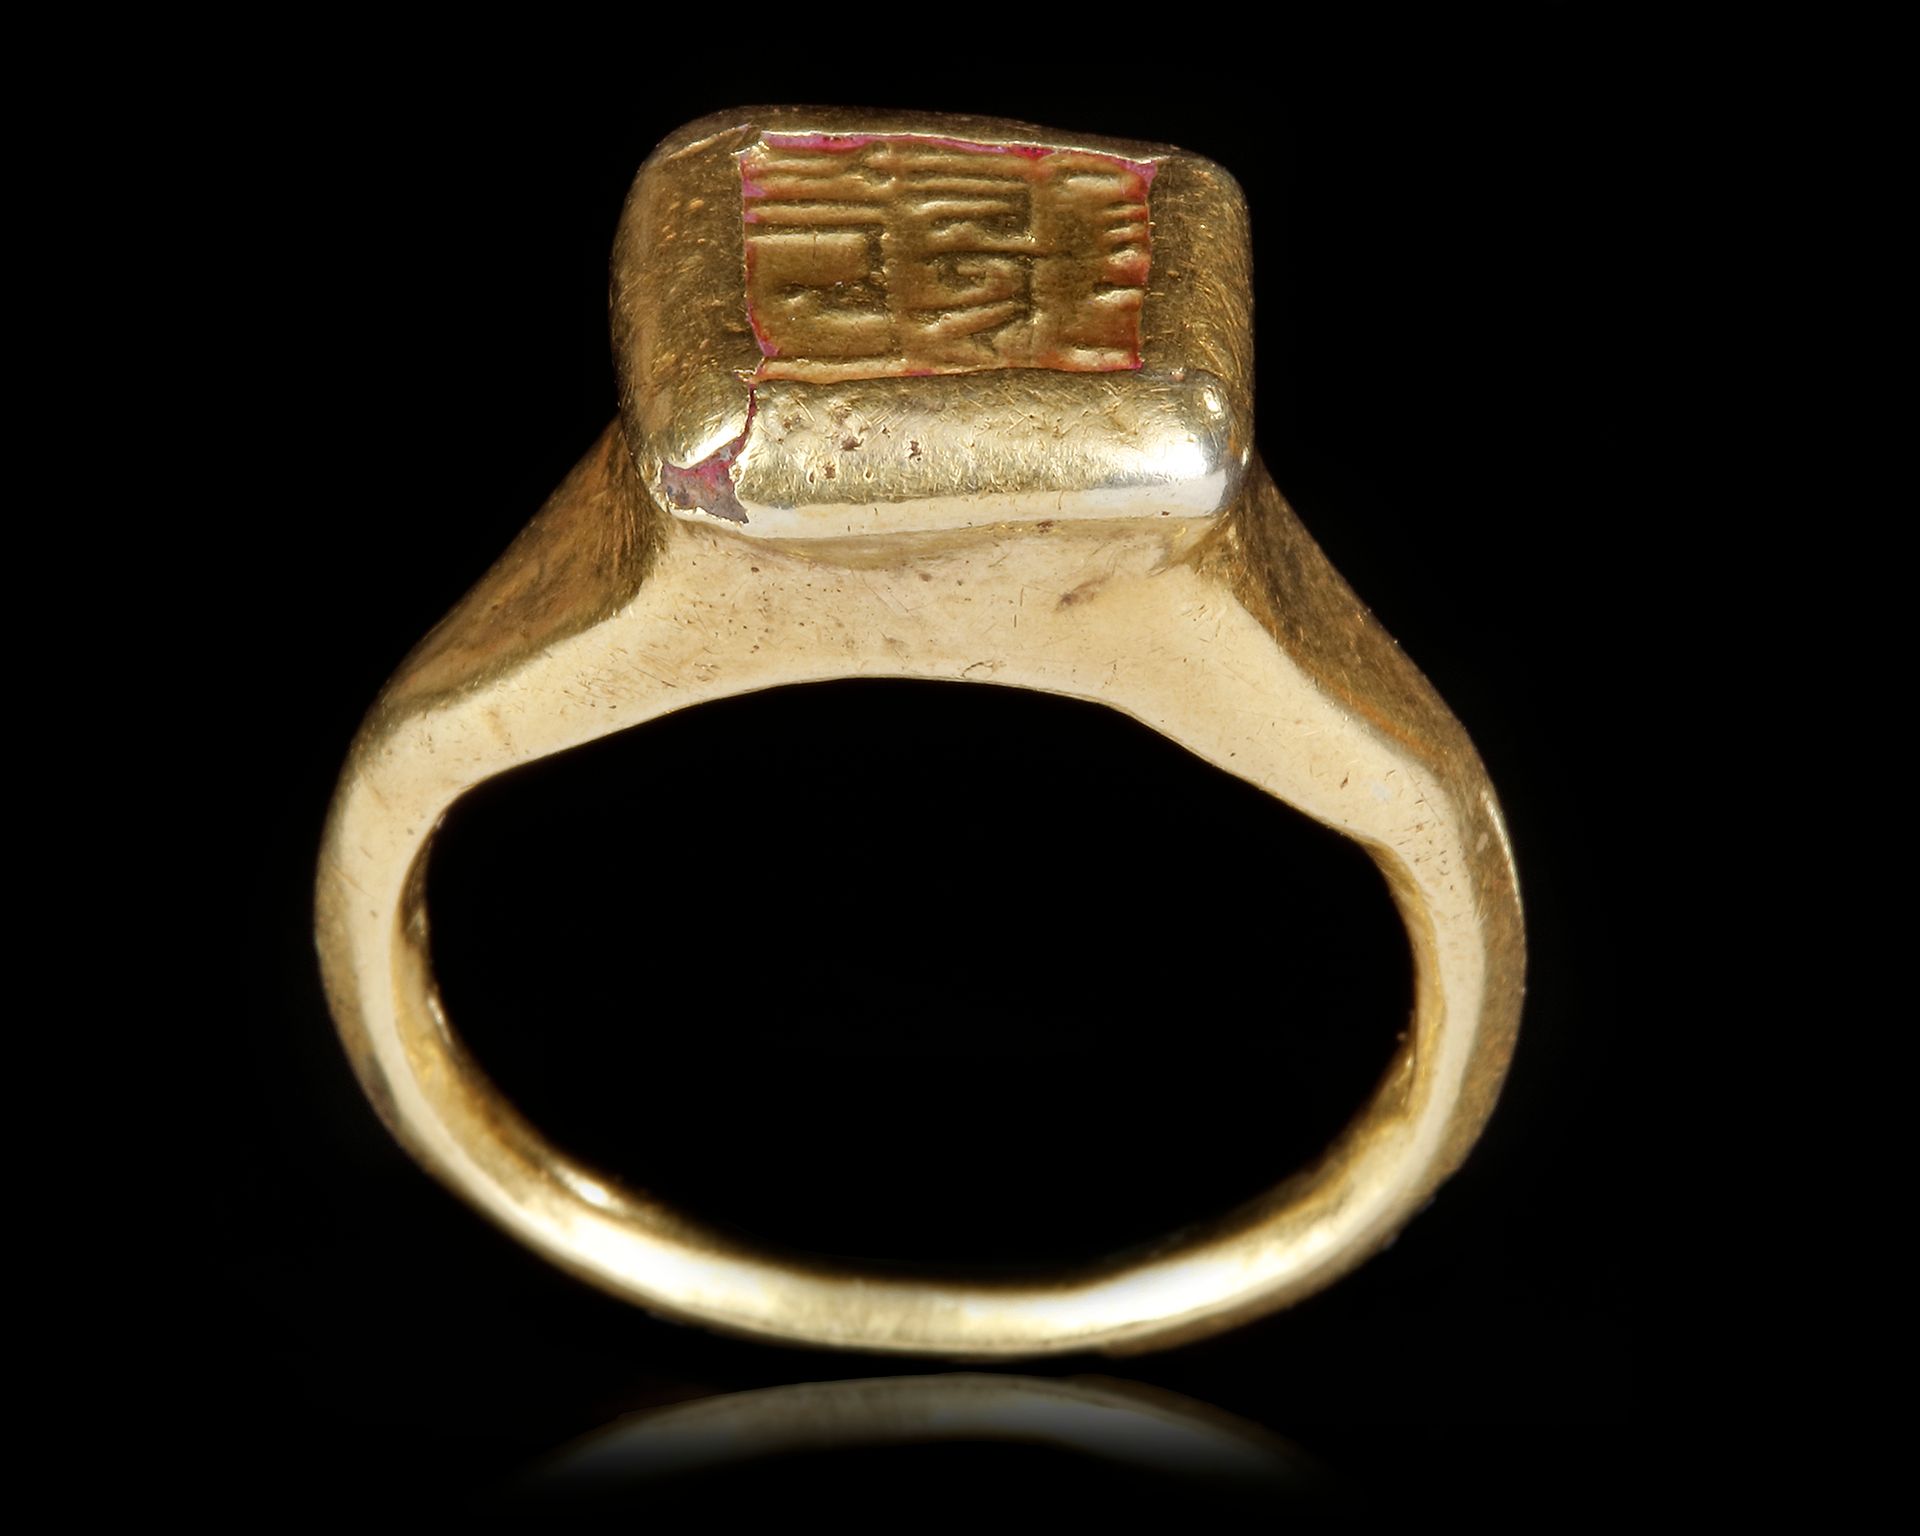 A FATIMID INSCRIBED GOLD RING, 12TH-13TH CENTURY Inscriptions

"Il n'y a pas d'a&hellip;